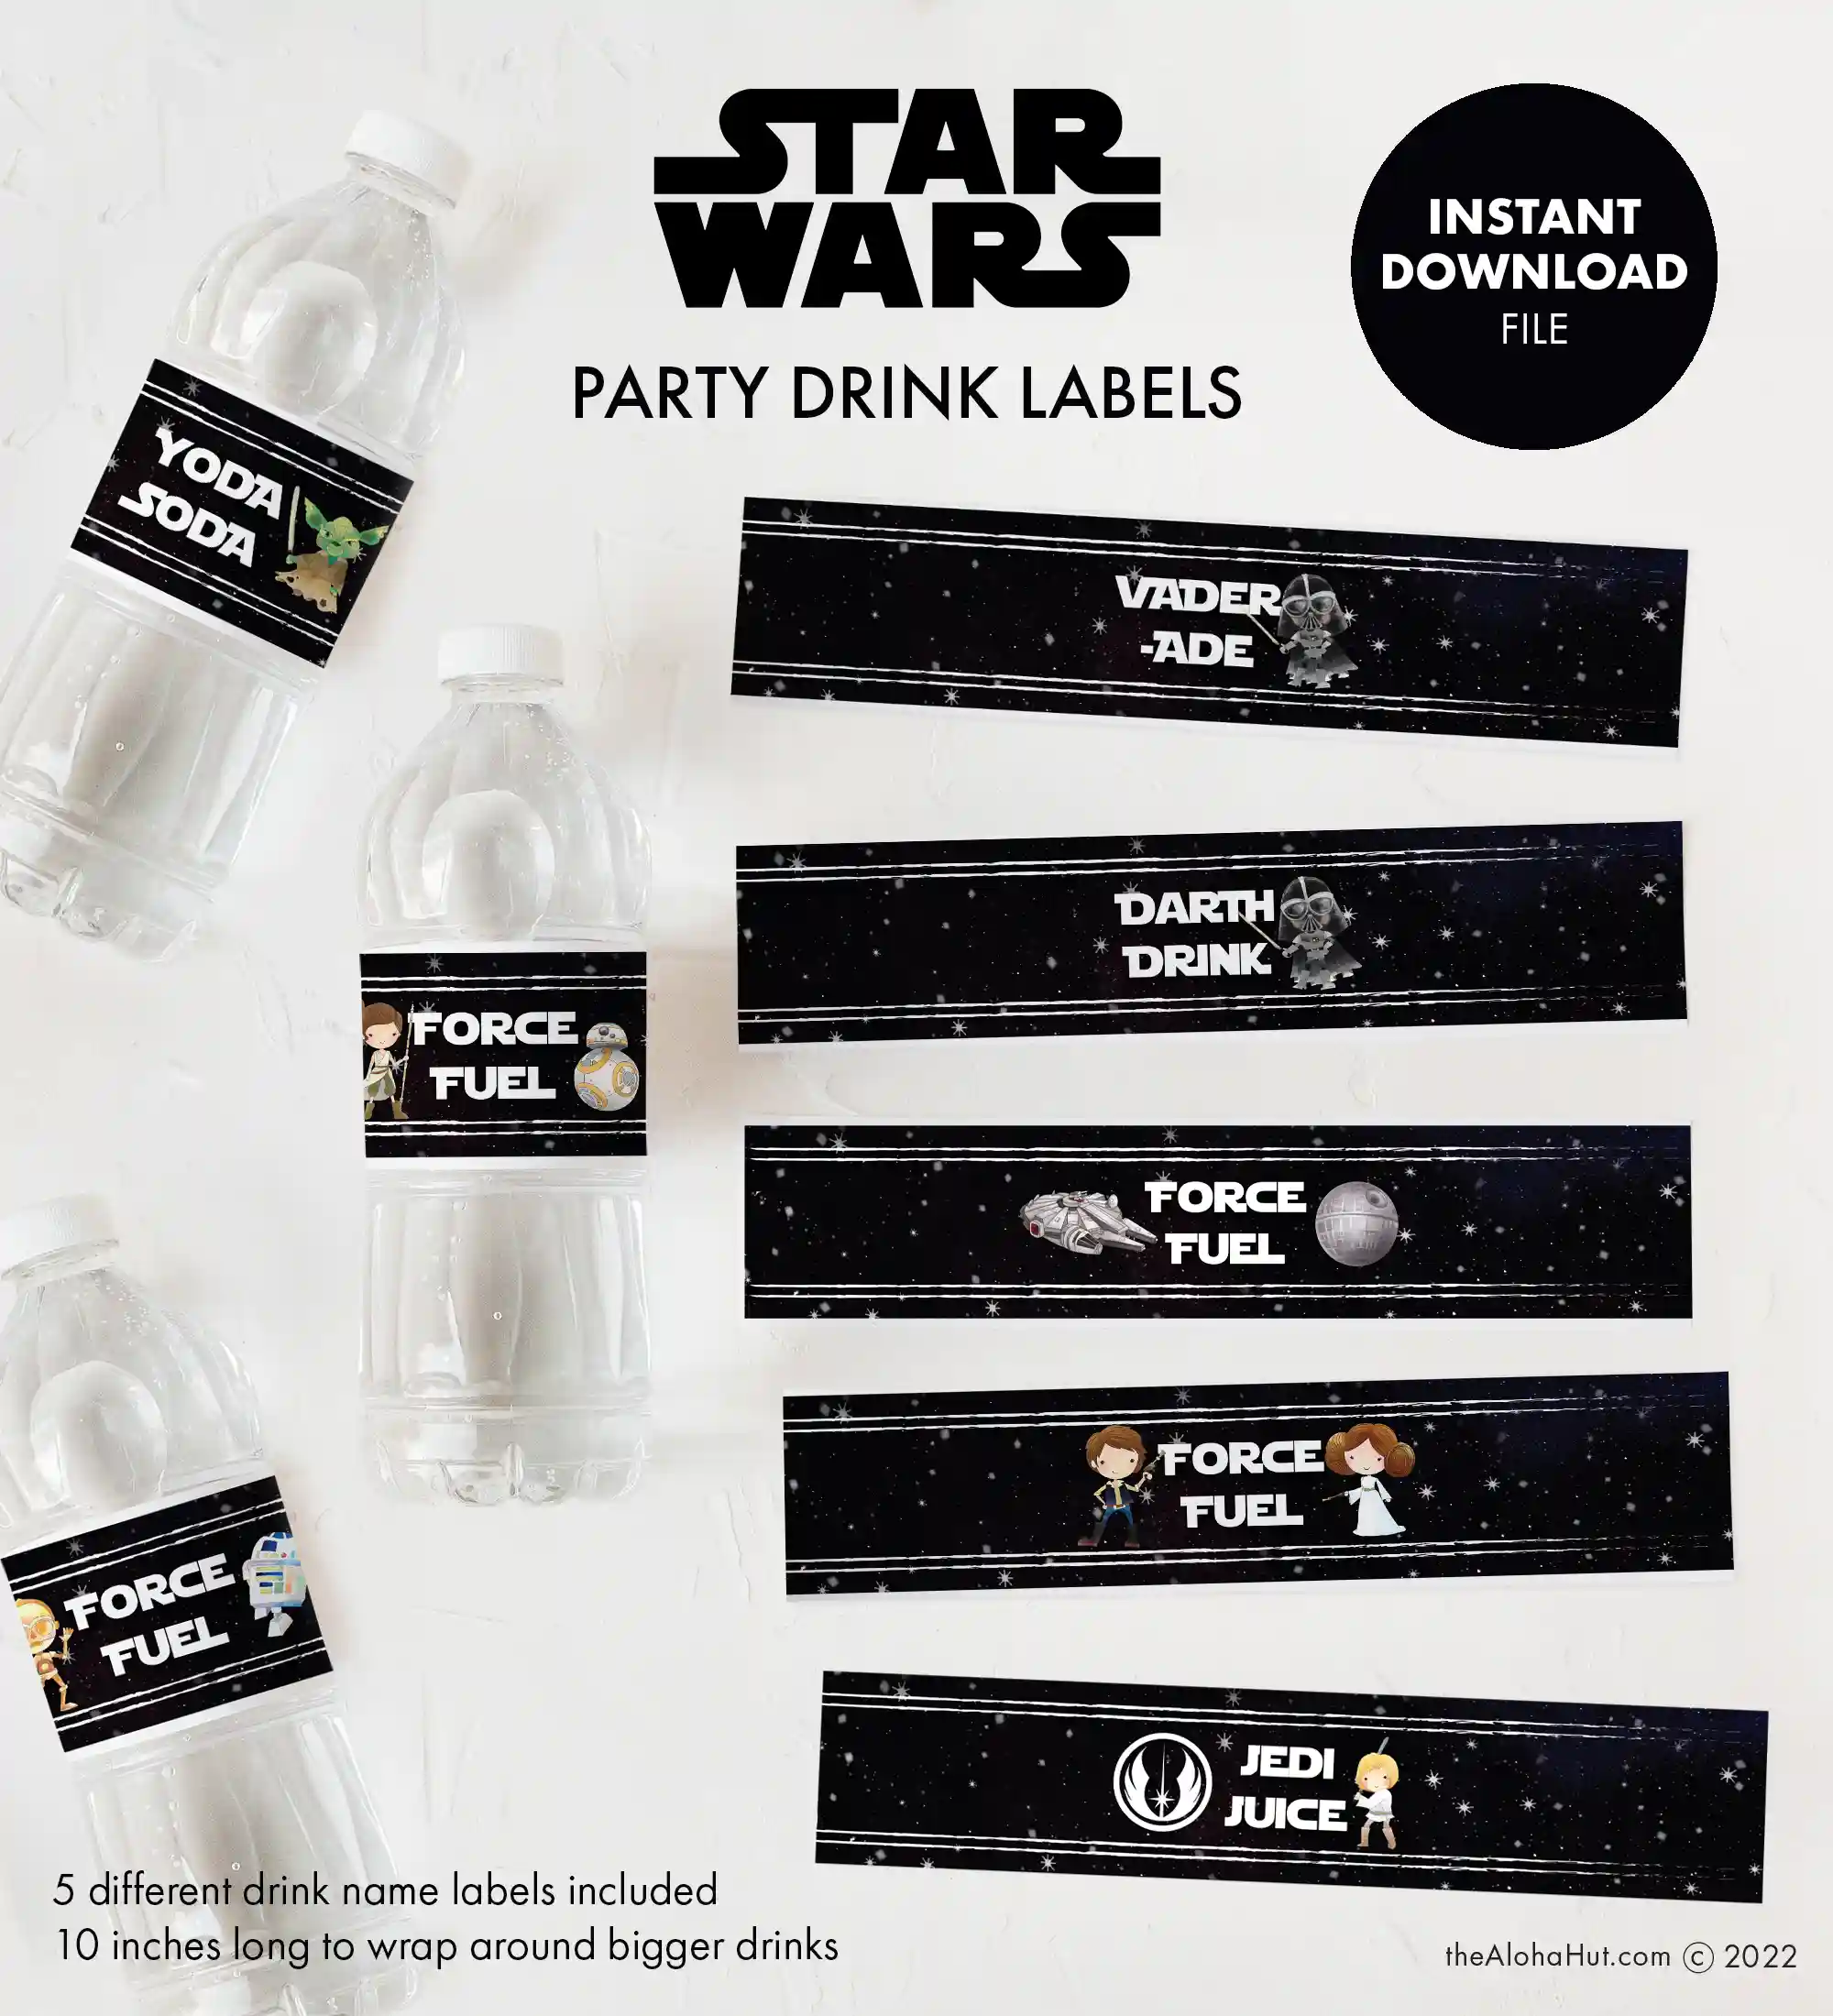 Star Wars party ideas, activities, birthday party games, decorations, and prints. Ideas and tips and tricks for throwing the best Star Wars themed kids birthday party, baby shower, or one with the force celebration. Includes Star Wars printable games, decorations (cupcake toppers, banners, gift tags, characters) and Star Wars party games (BINGO, scavenger hunt, pin the lightsaber on Yoda or Darth Vader). Drink labels vader-ade gatorade, darth drink, force fuel, jedi juice, luke skywater.